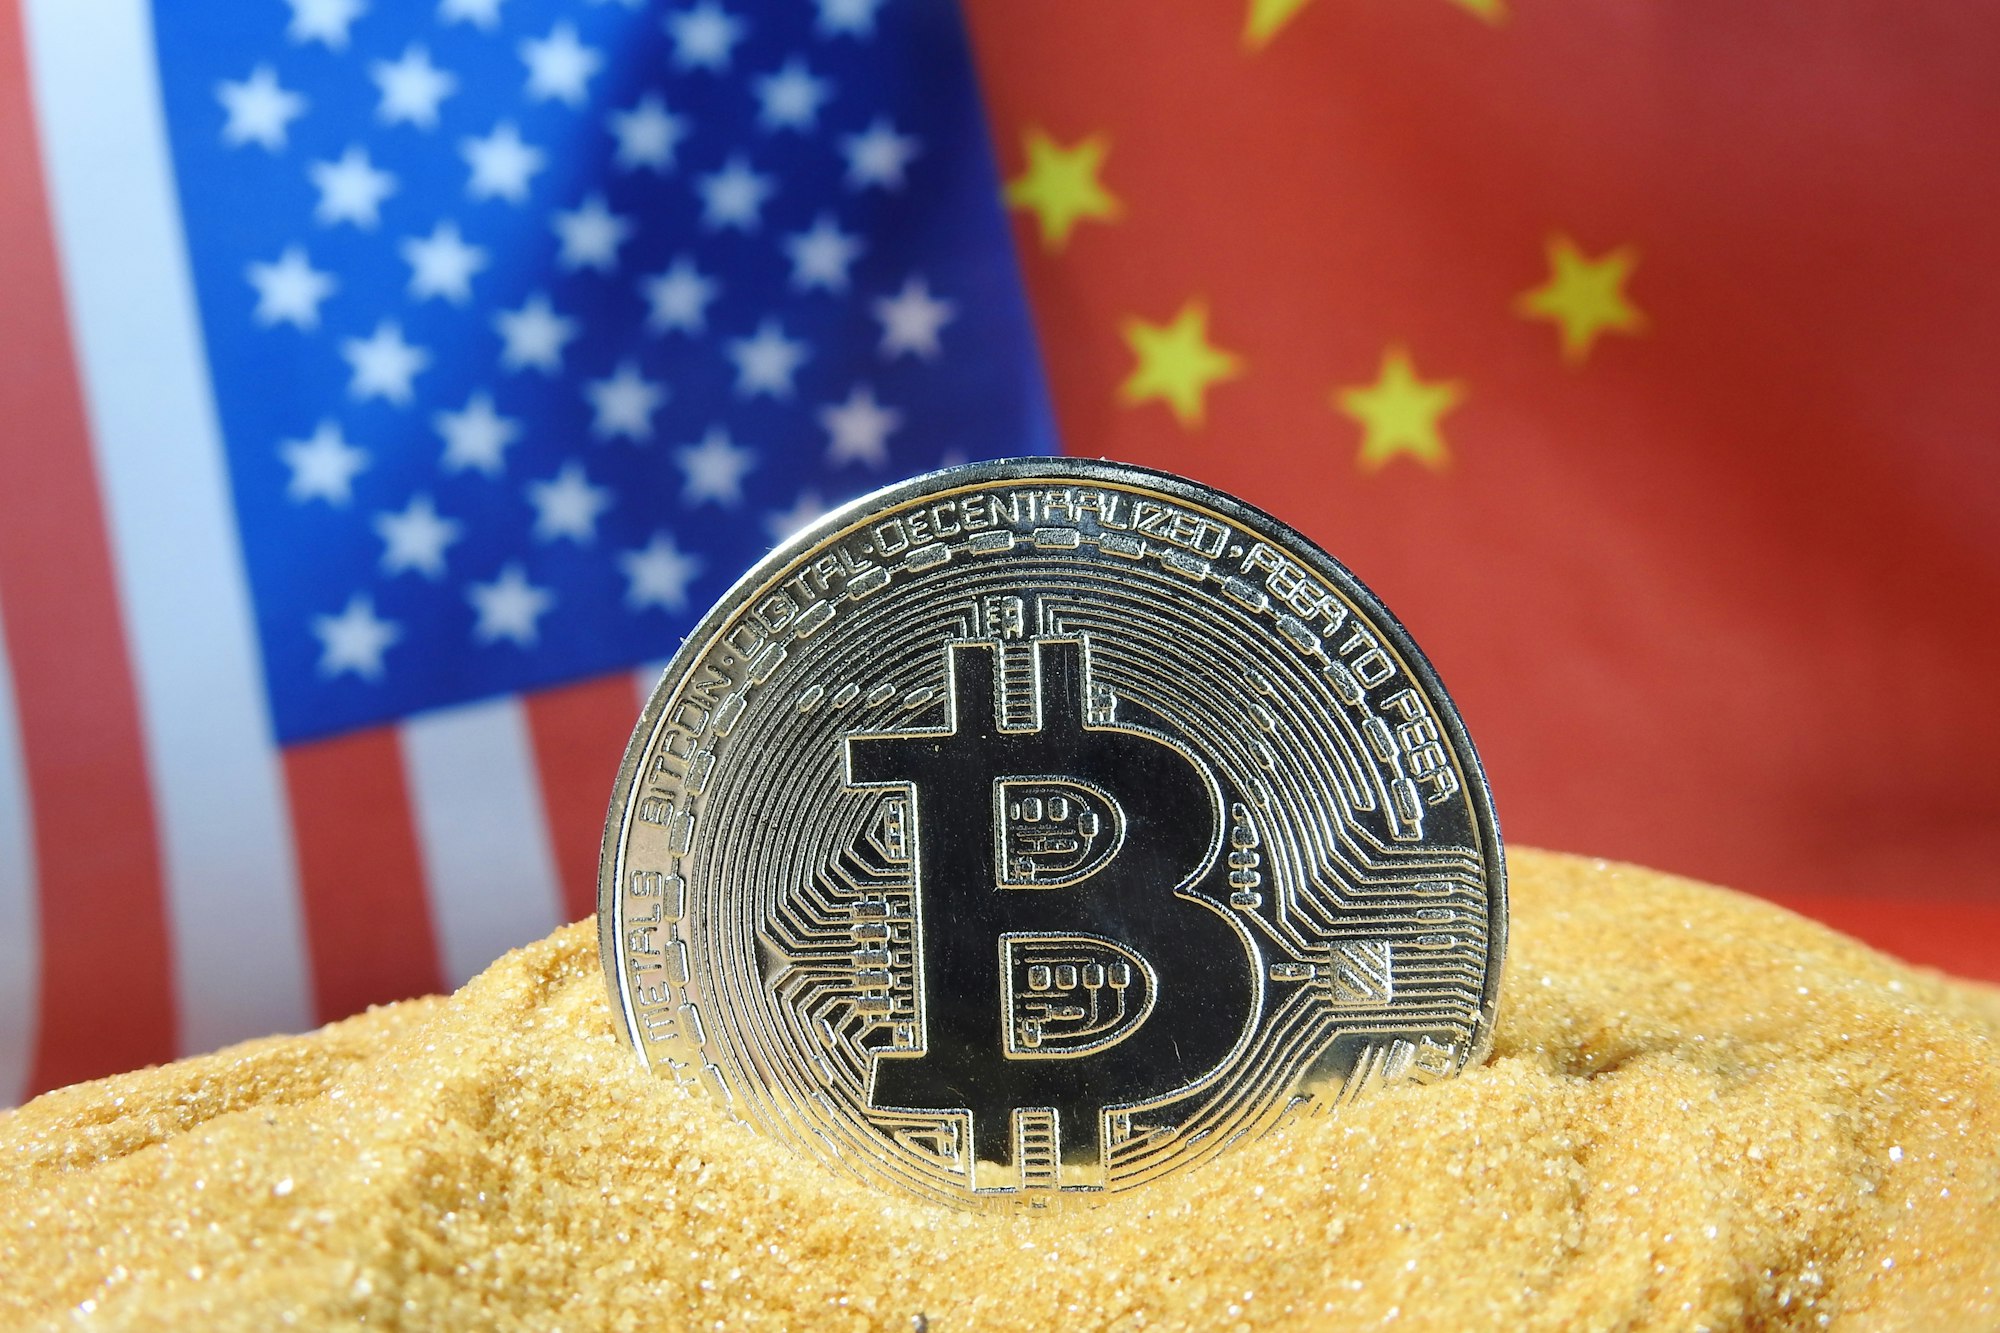 Following China’s Mining Ban, Bitcoin Hashrate Almost Fully Recovered